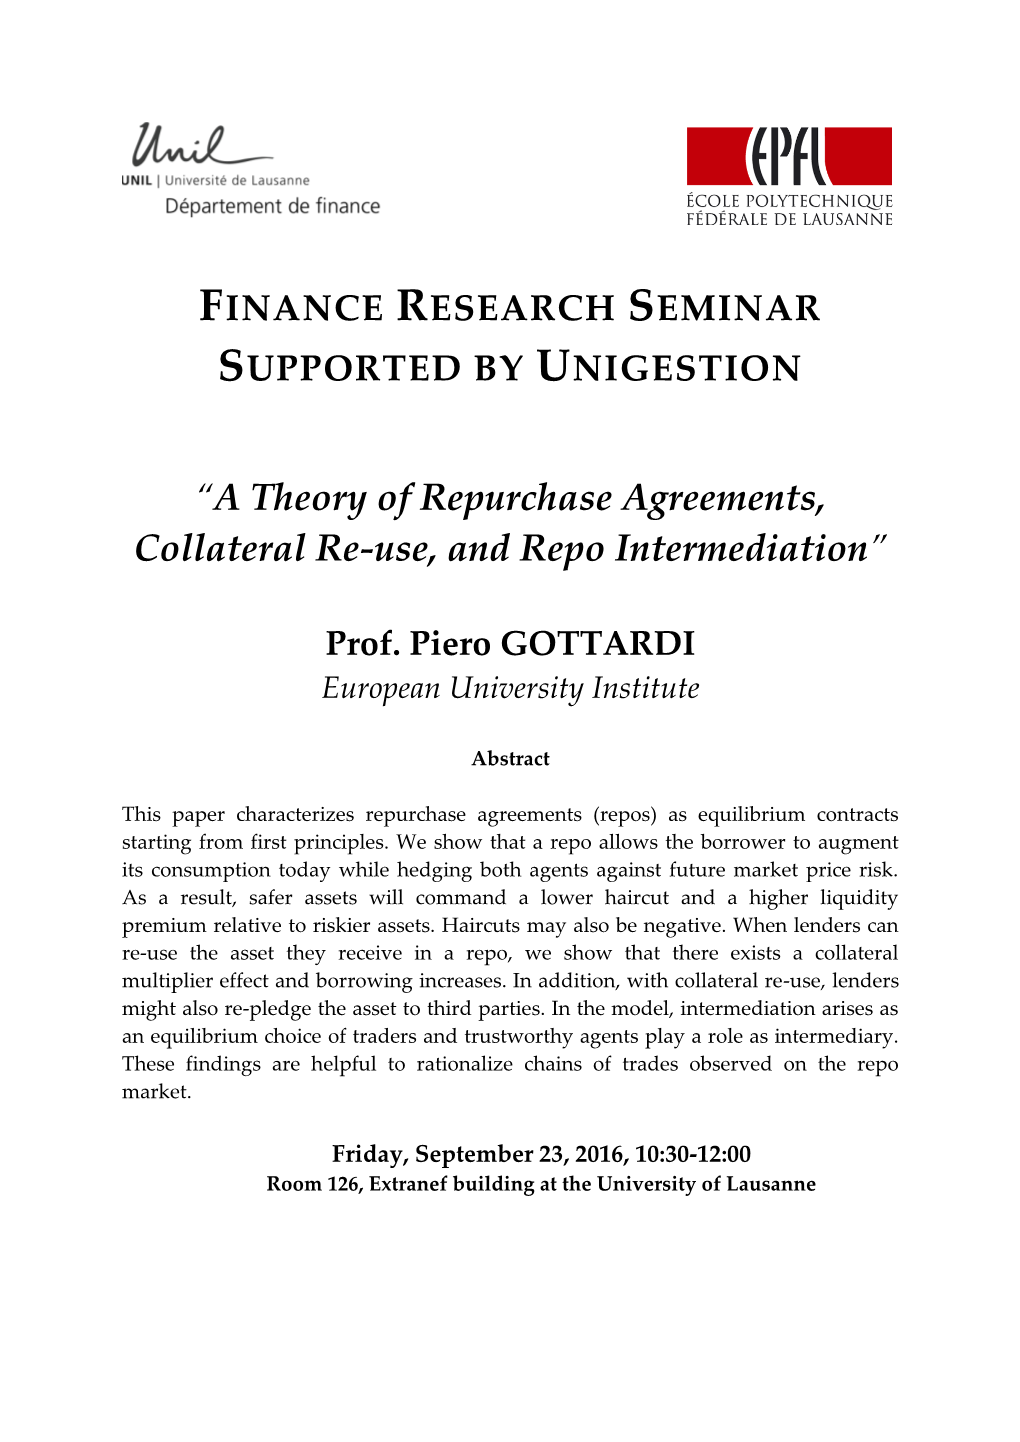 A Theory of Repurchase Agreements, Collateral Re-Use, and Repo Intermediation”